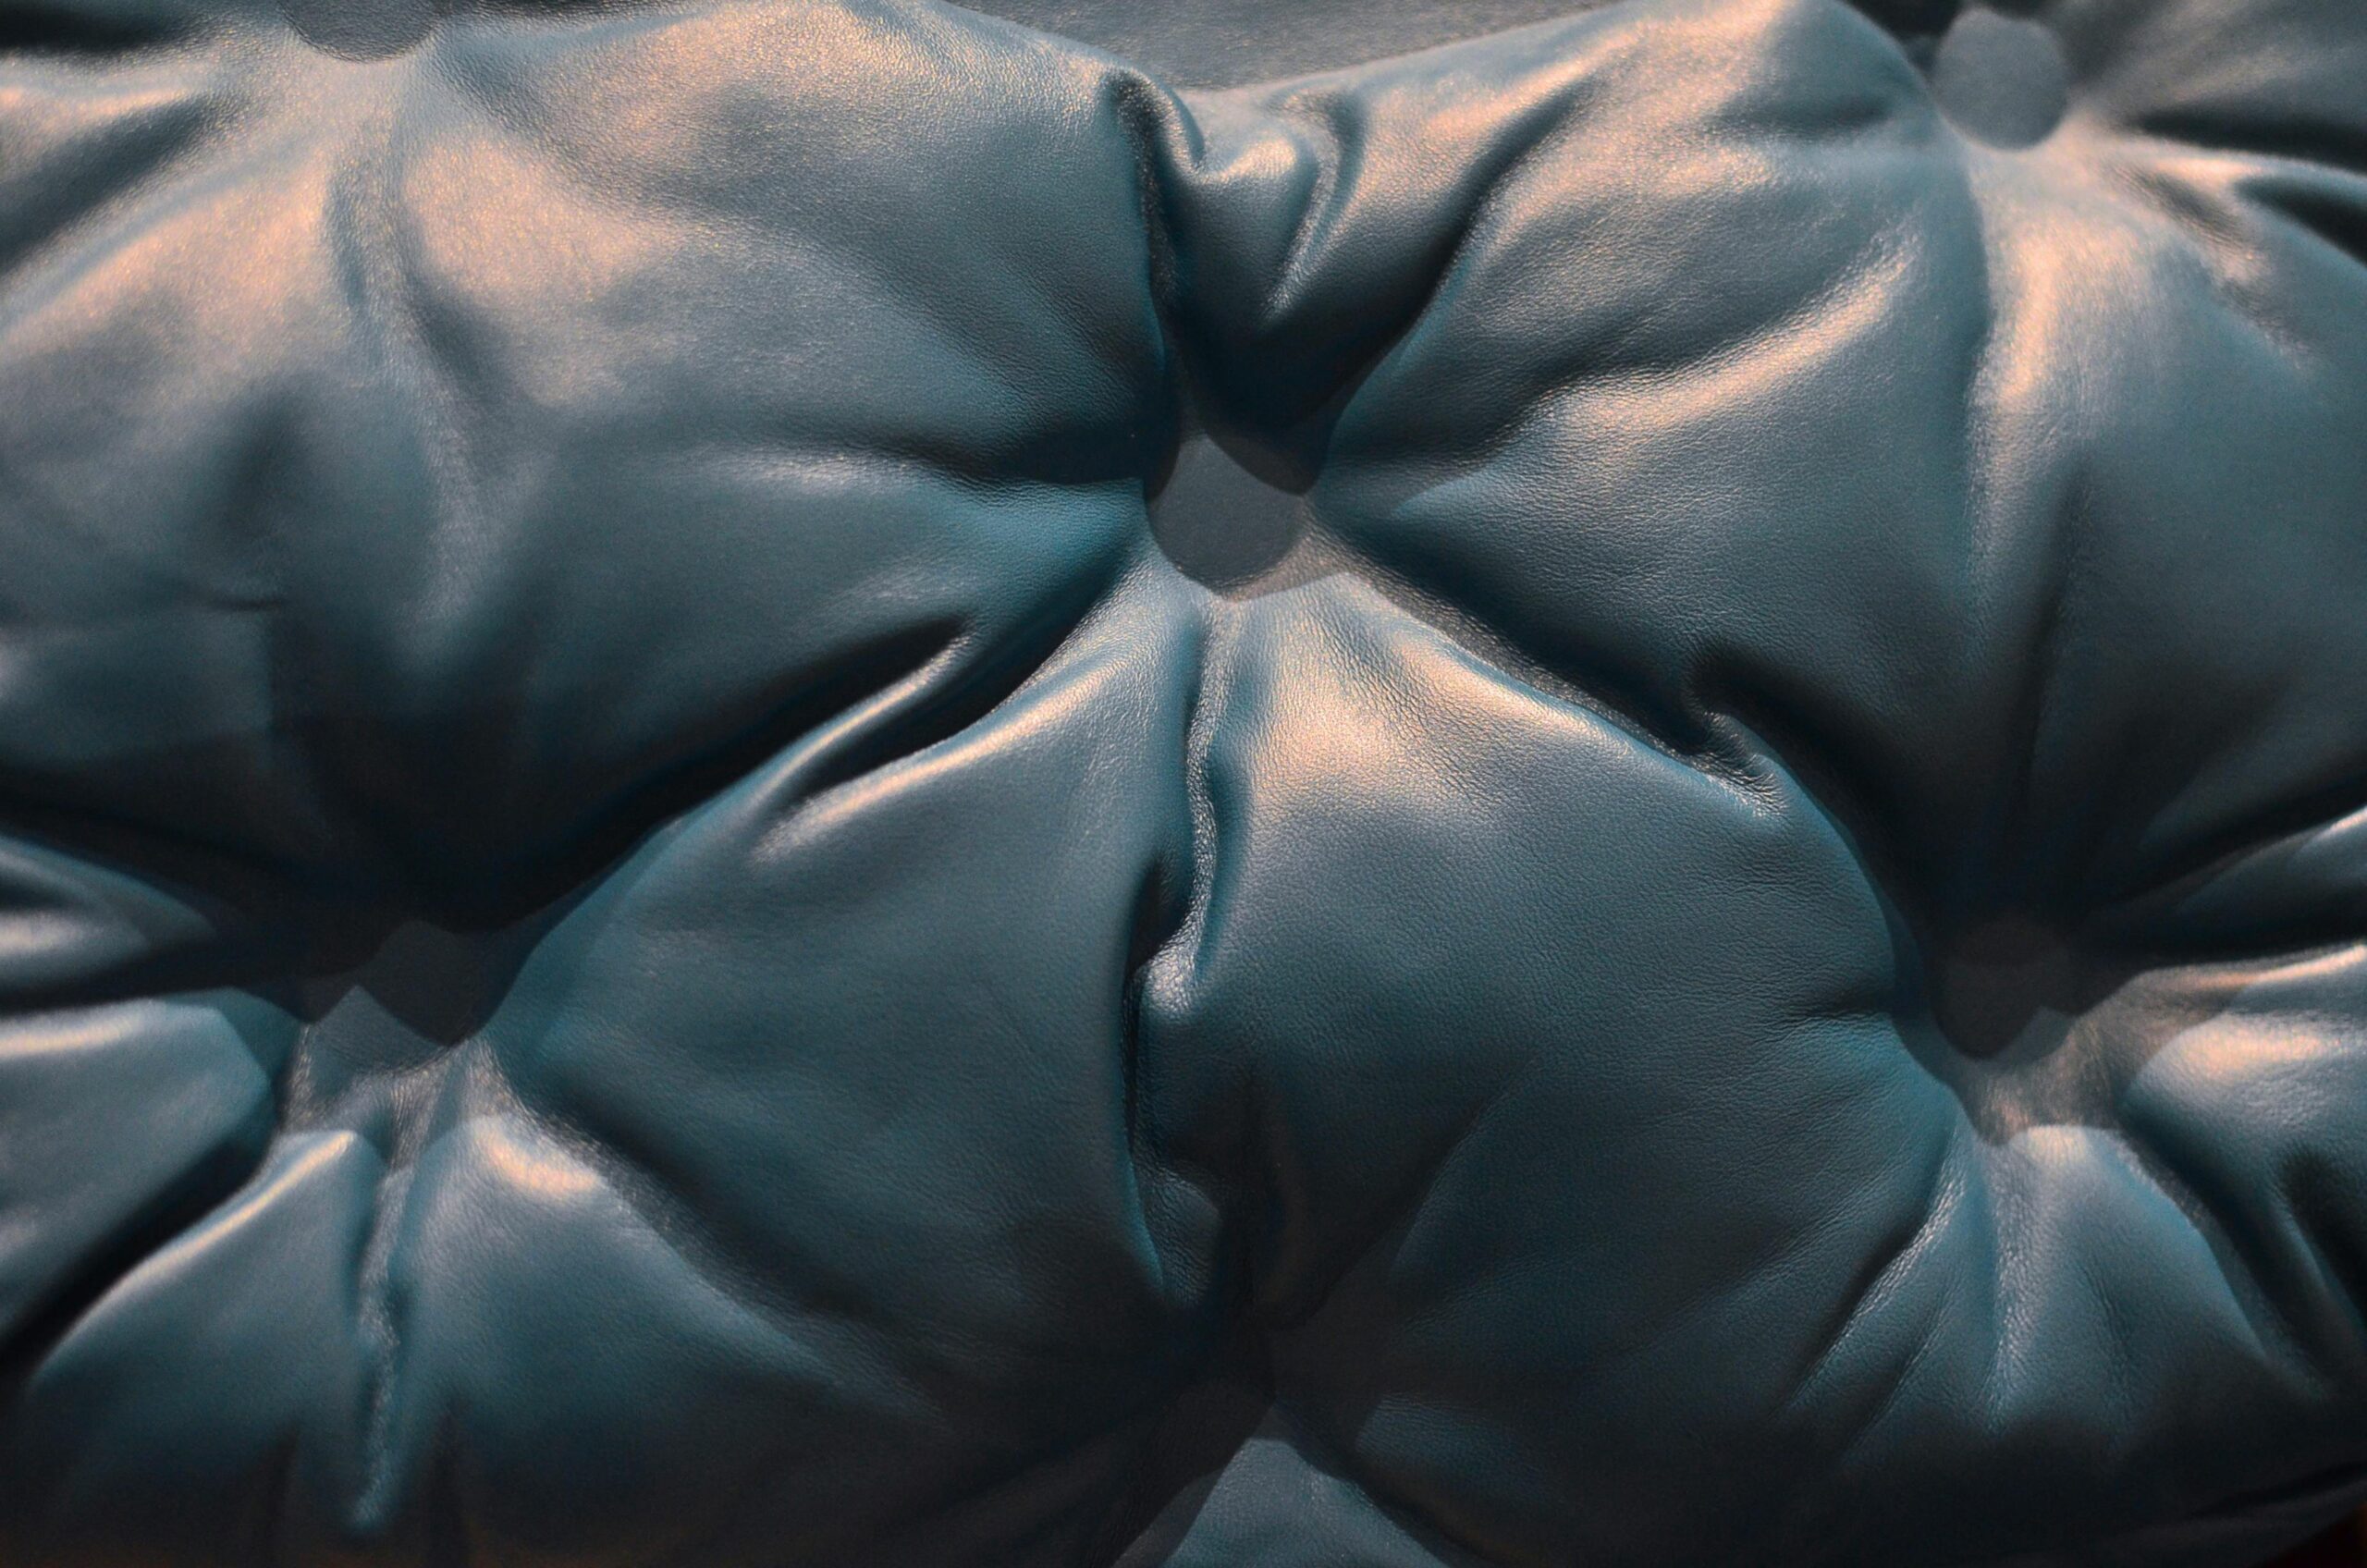 Learn how to clean a leather couch with these items to get rid of stains. Pictured: A blue leather couch